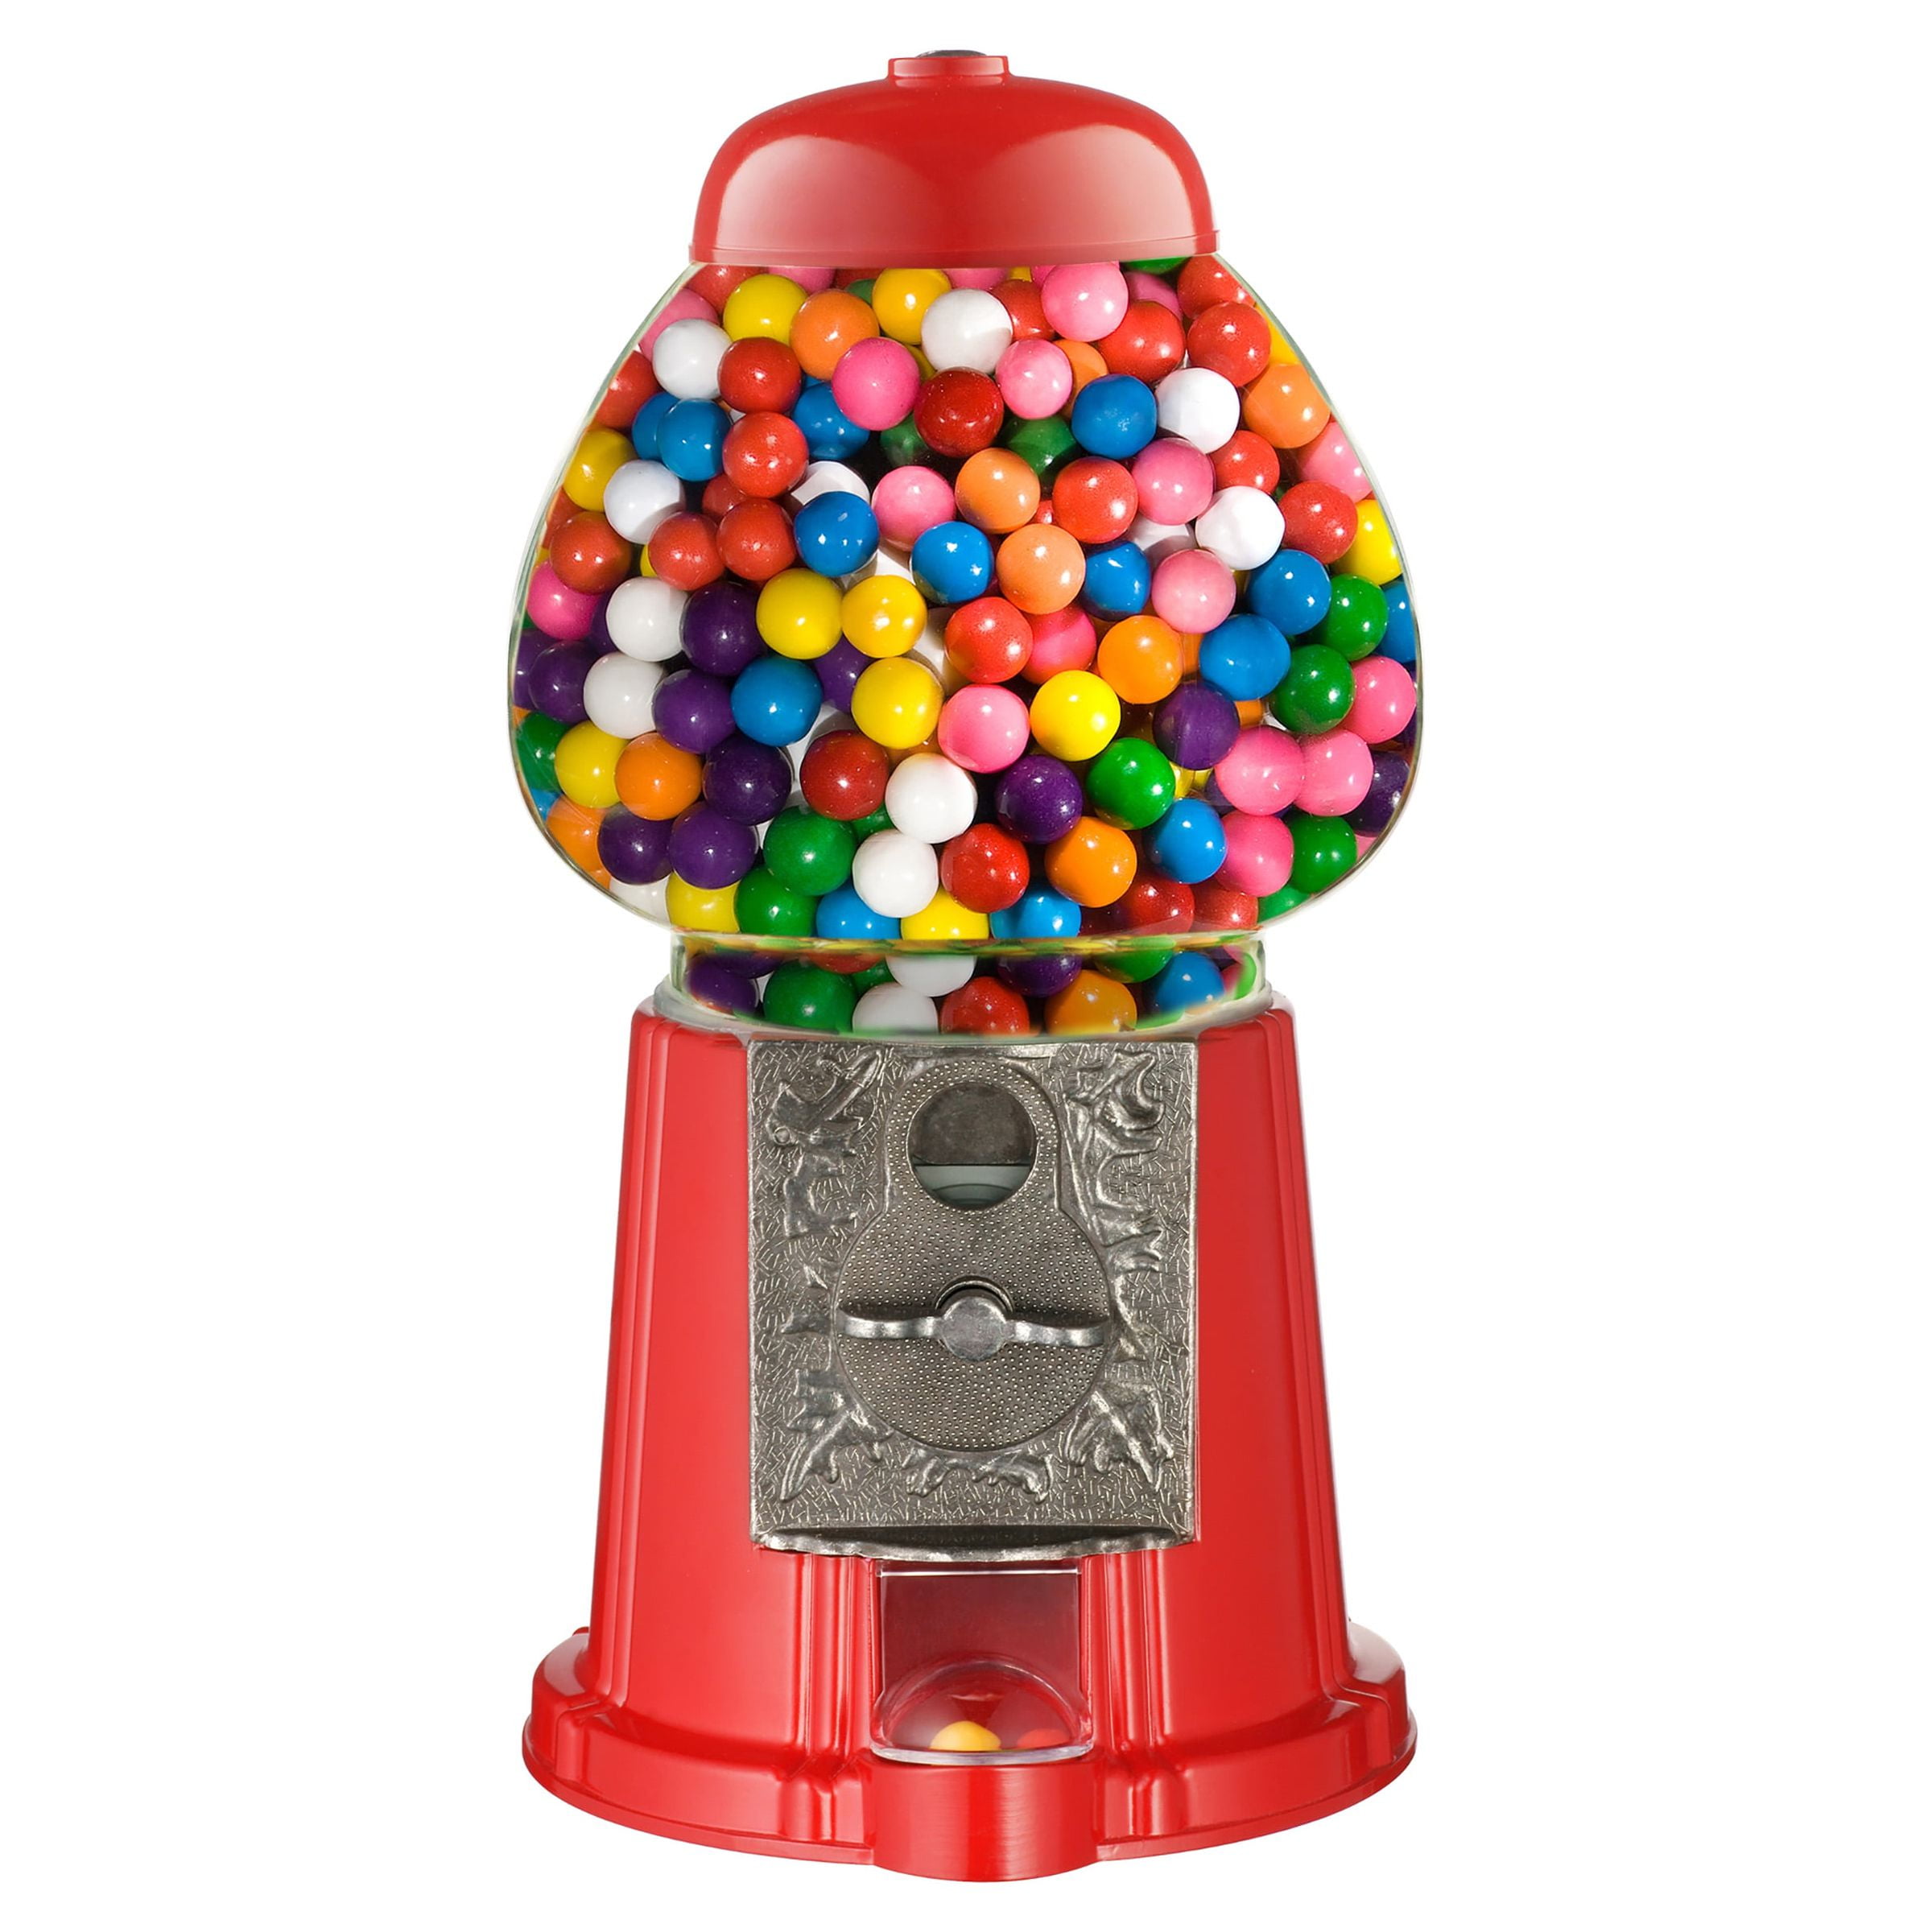 Mini Classic Candy Dispenser, Cute Candy Nut Dispenser Fun Machine Gifts  for Kids Children Birthdays Parties Christmas Party(Red)